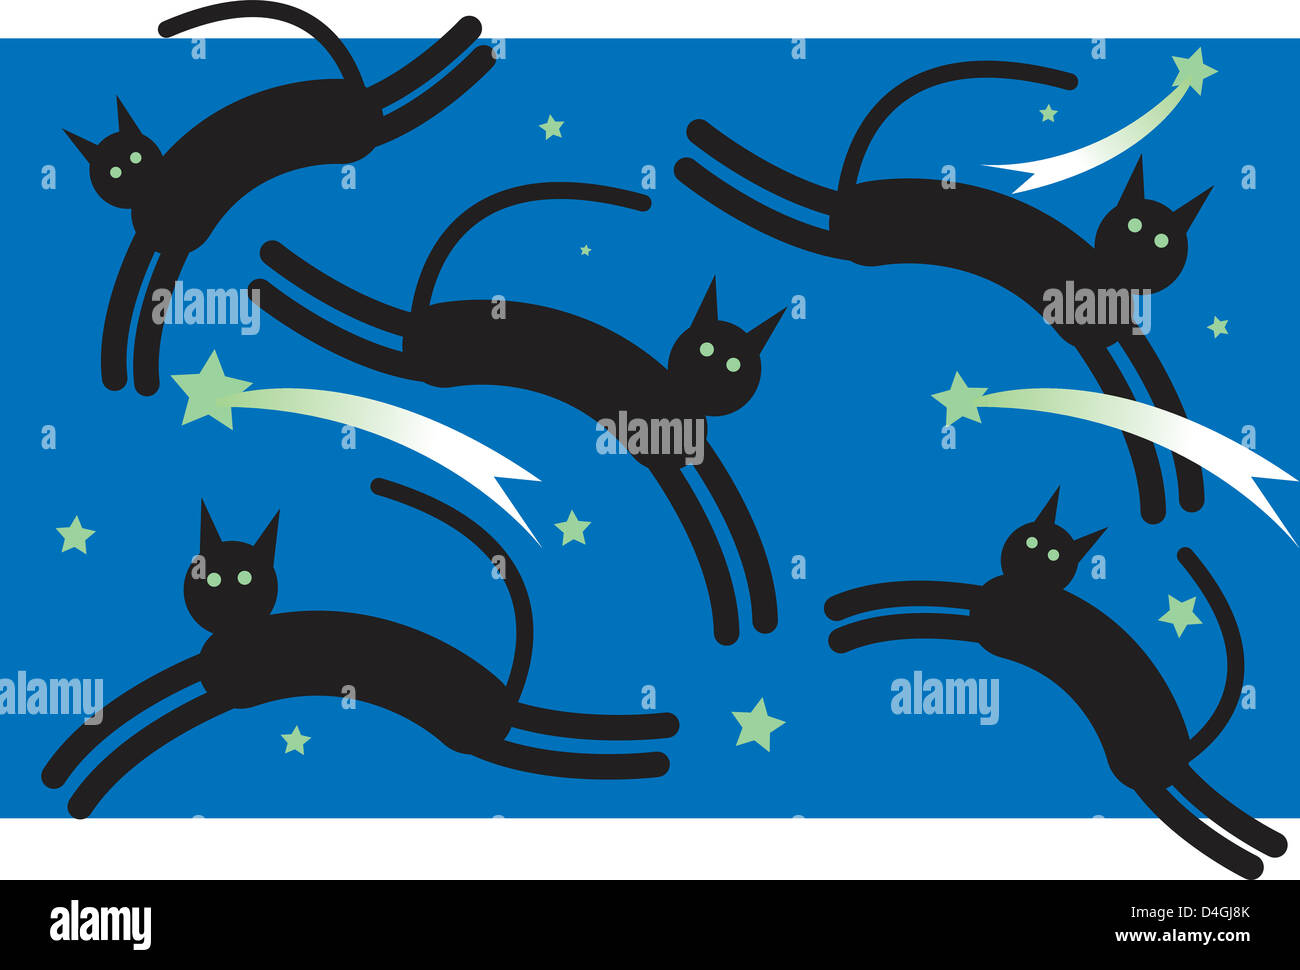 Black cats and shooting stars Stock Photo - Alamy